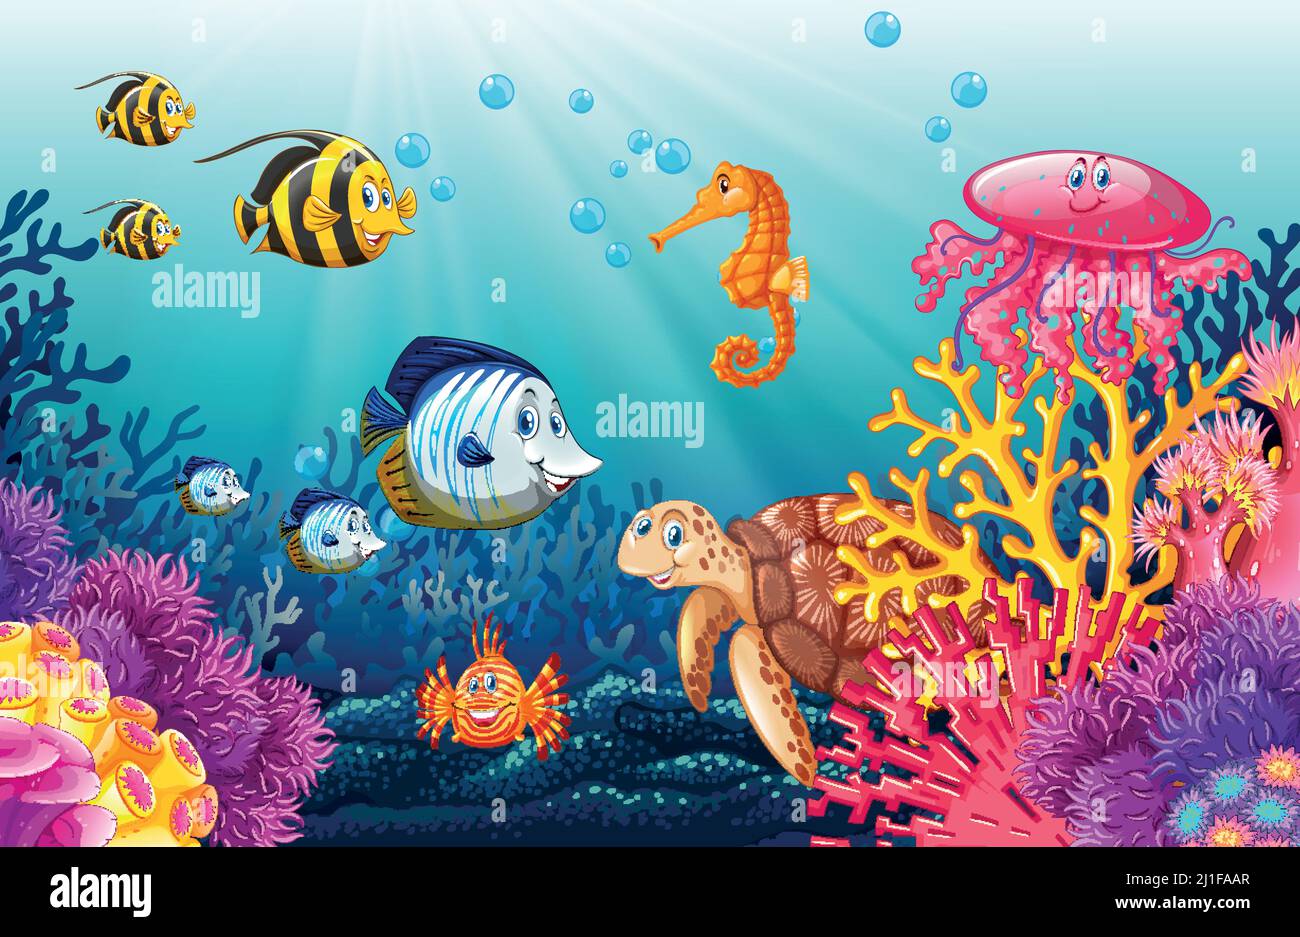 60200 Under The Sea Drawing Stock Photos Pictures  RoyaltyFree Images   iStock